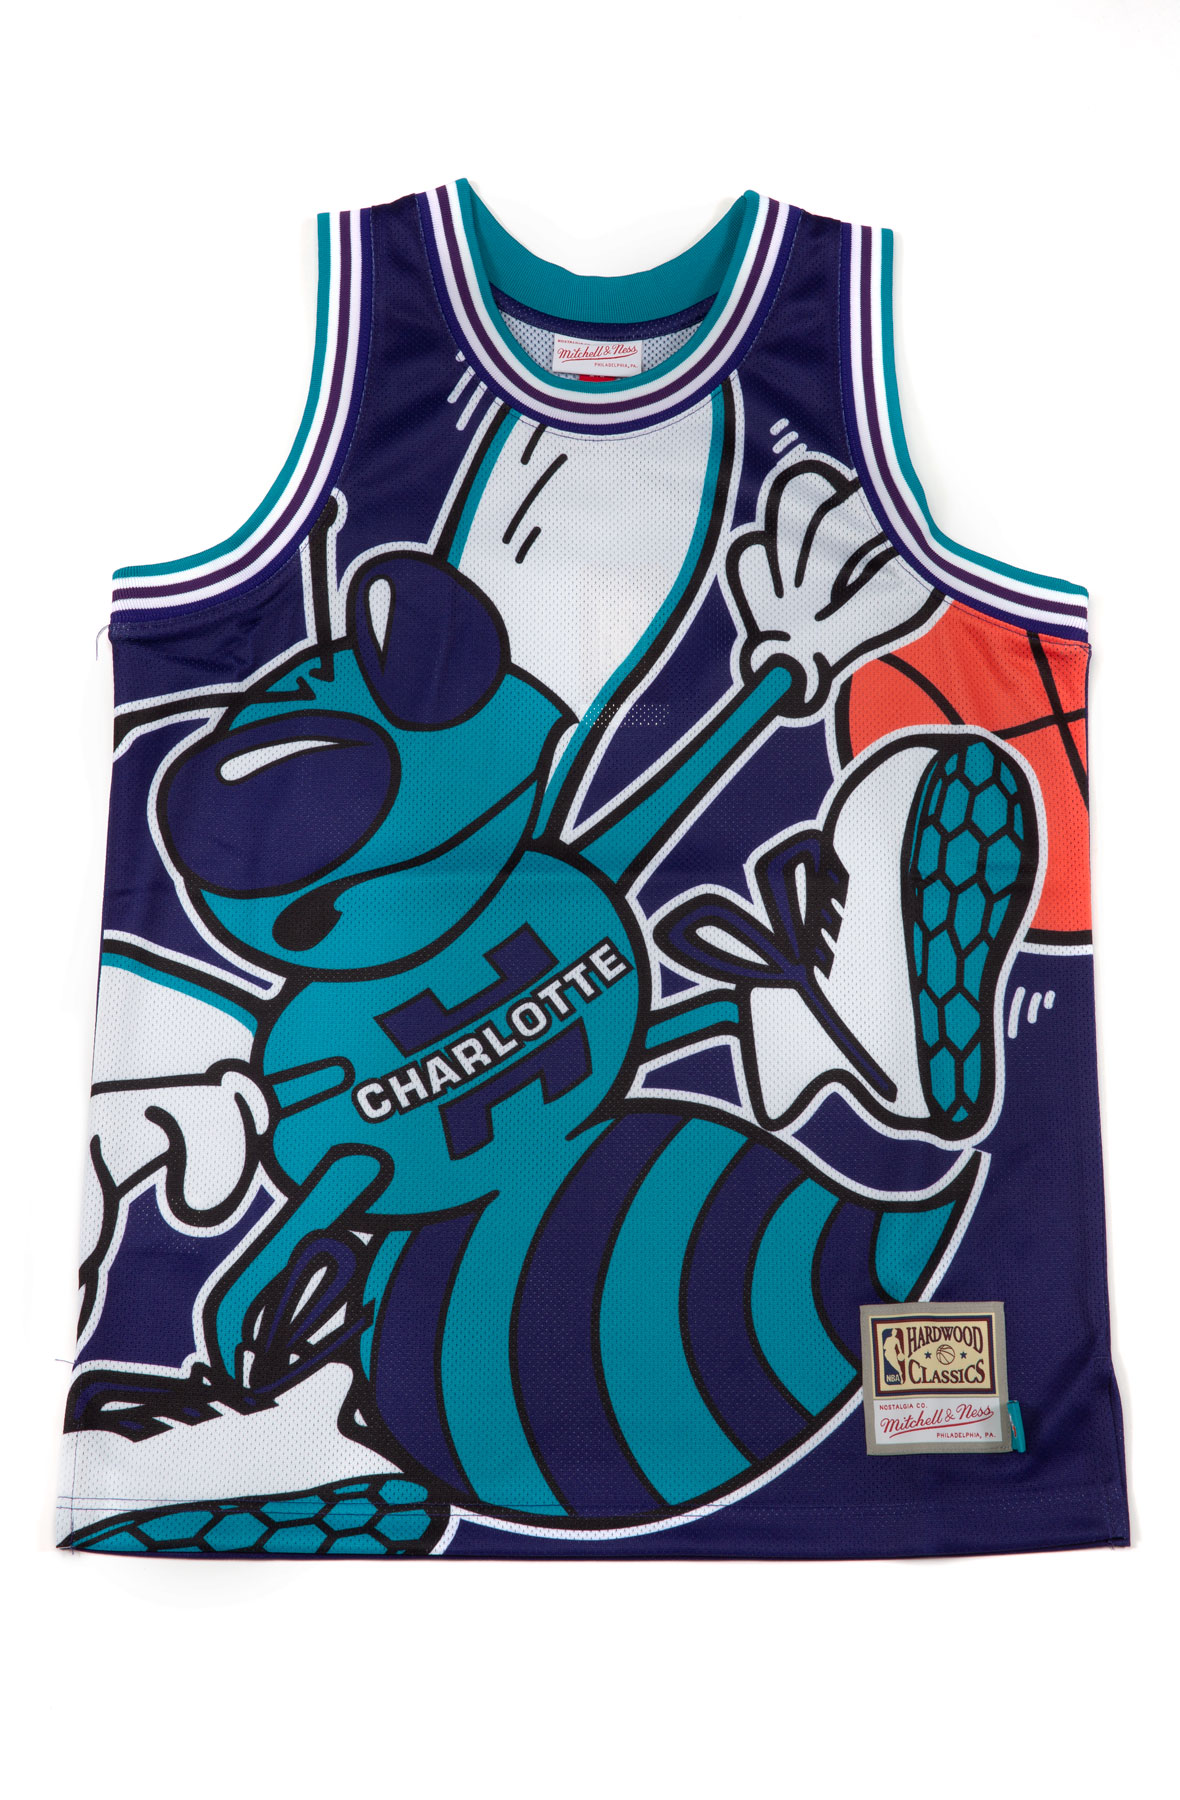 Mitchell&Ness - Practice Day Buttom Front Jersey Charlotte Hornets